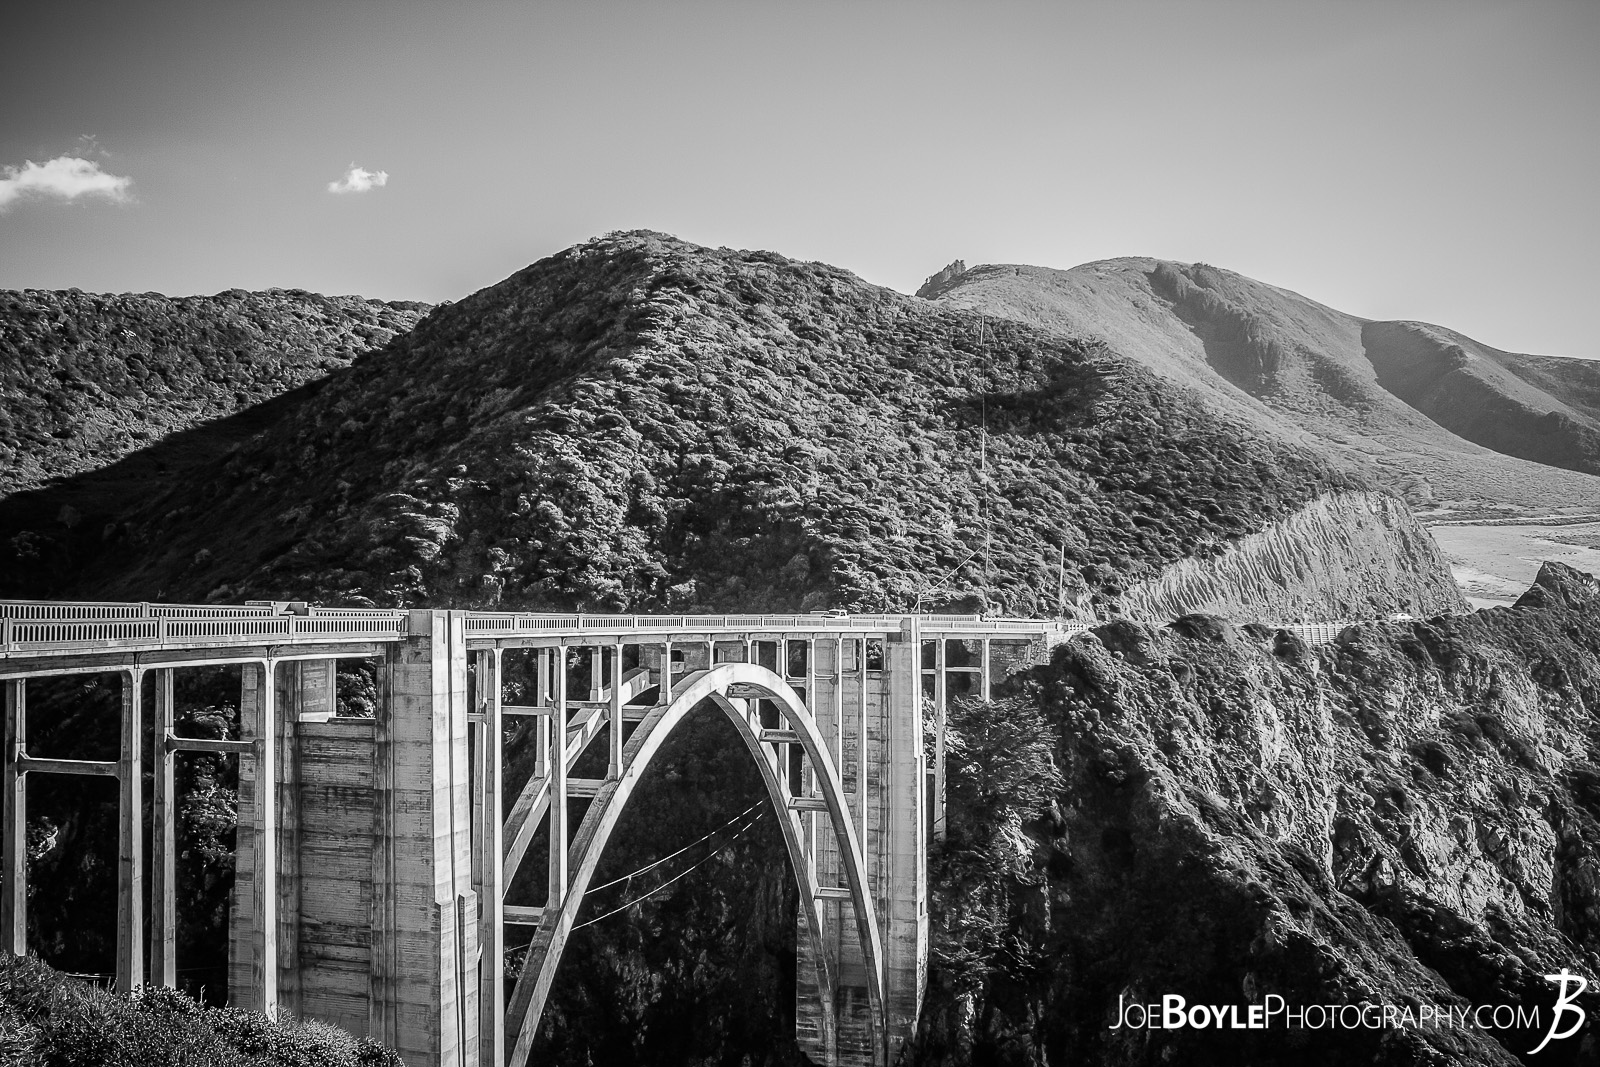  When I was traveling in California, visiting a few friends, we made sure that went down to see Big Sur. On the way we crossed the infamous and iconic Bixby Creek Bridge! 